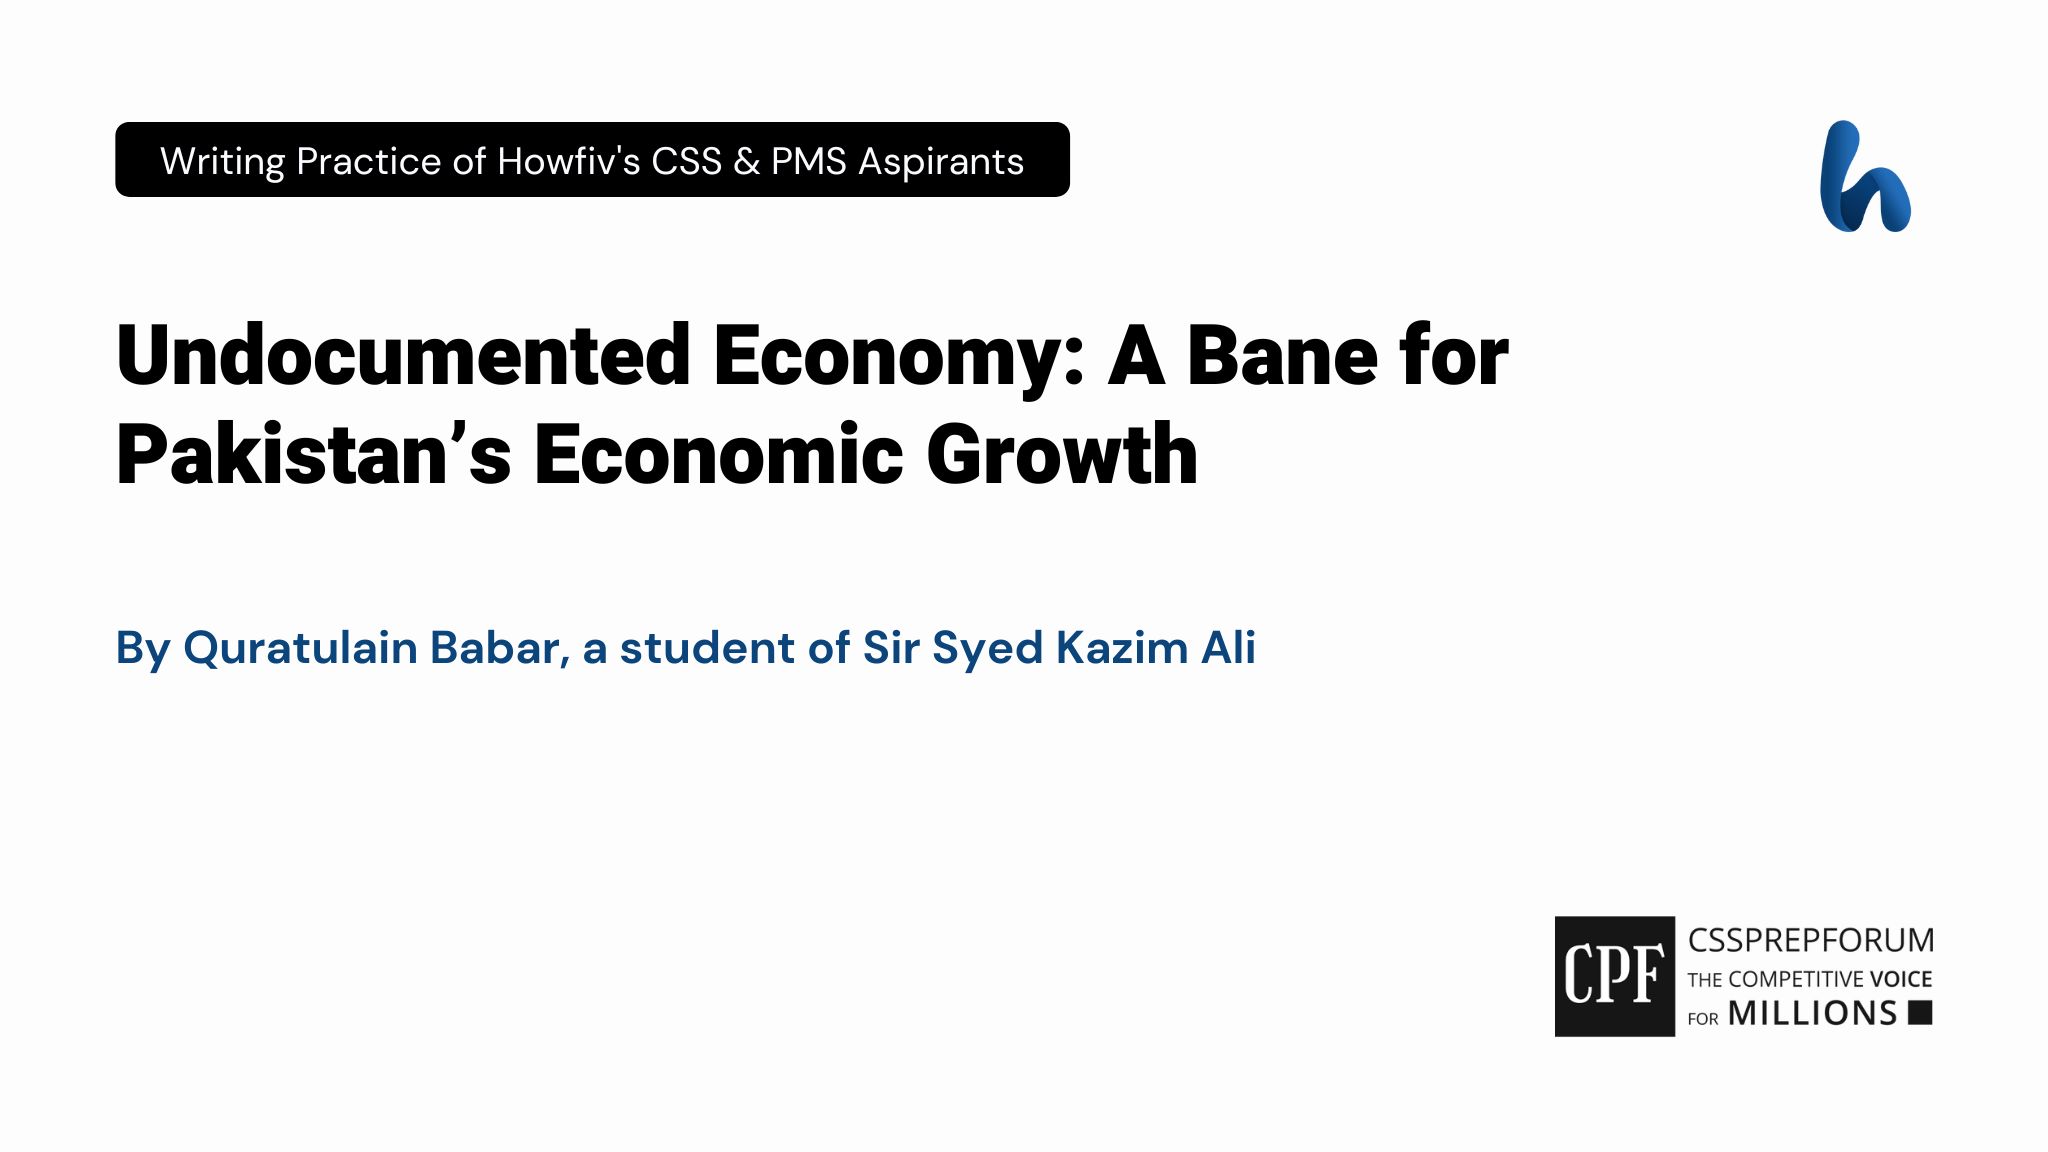 Undocumented Economy A Bane for Pakistan’s Economic Growth by Quratulain Babar